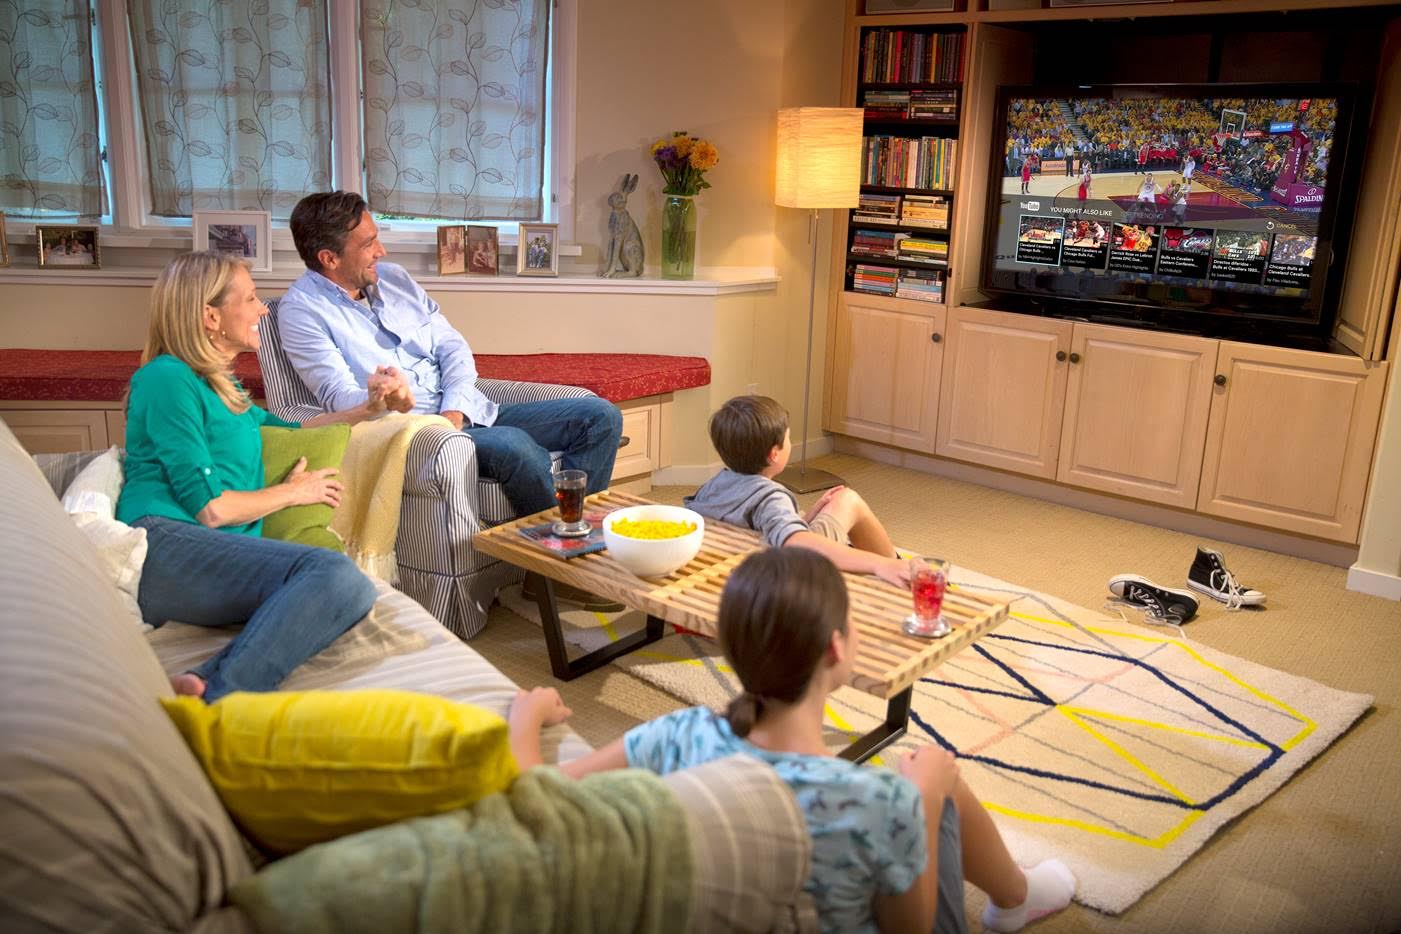 Sponsored Message: Slingbox lets you watch all your sports, movies, and other cable channels live, even on the road.